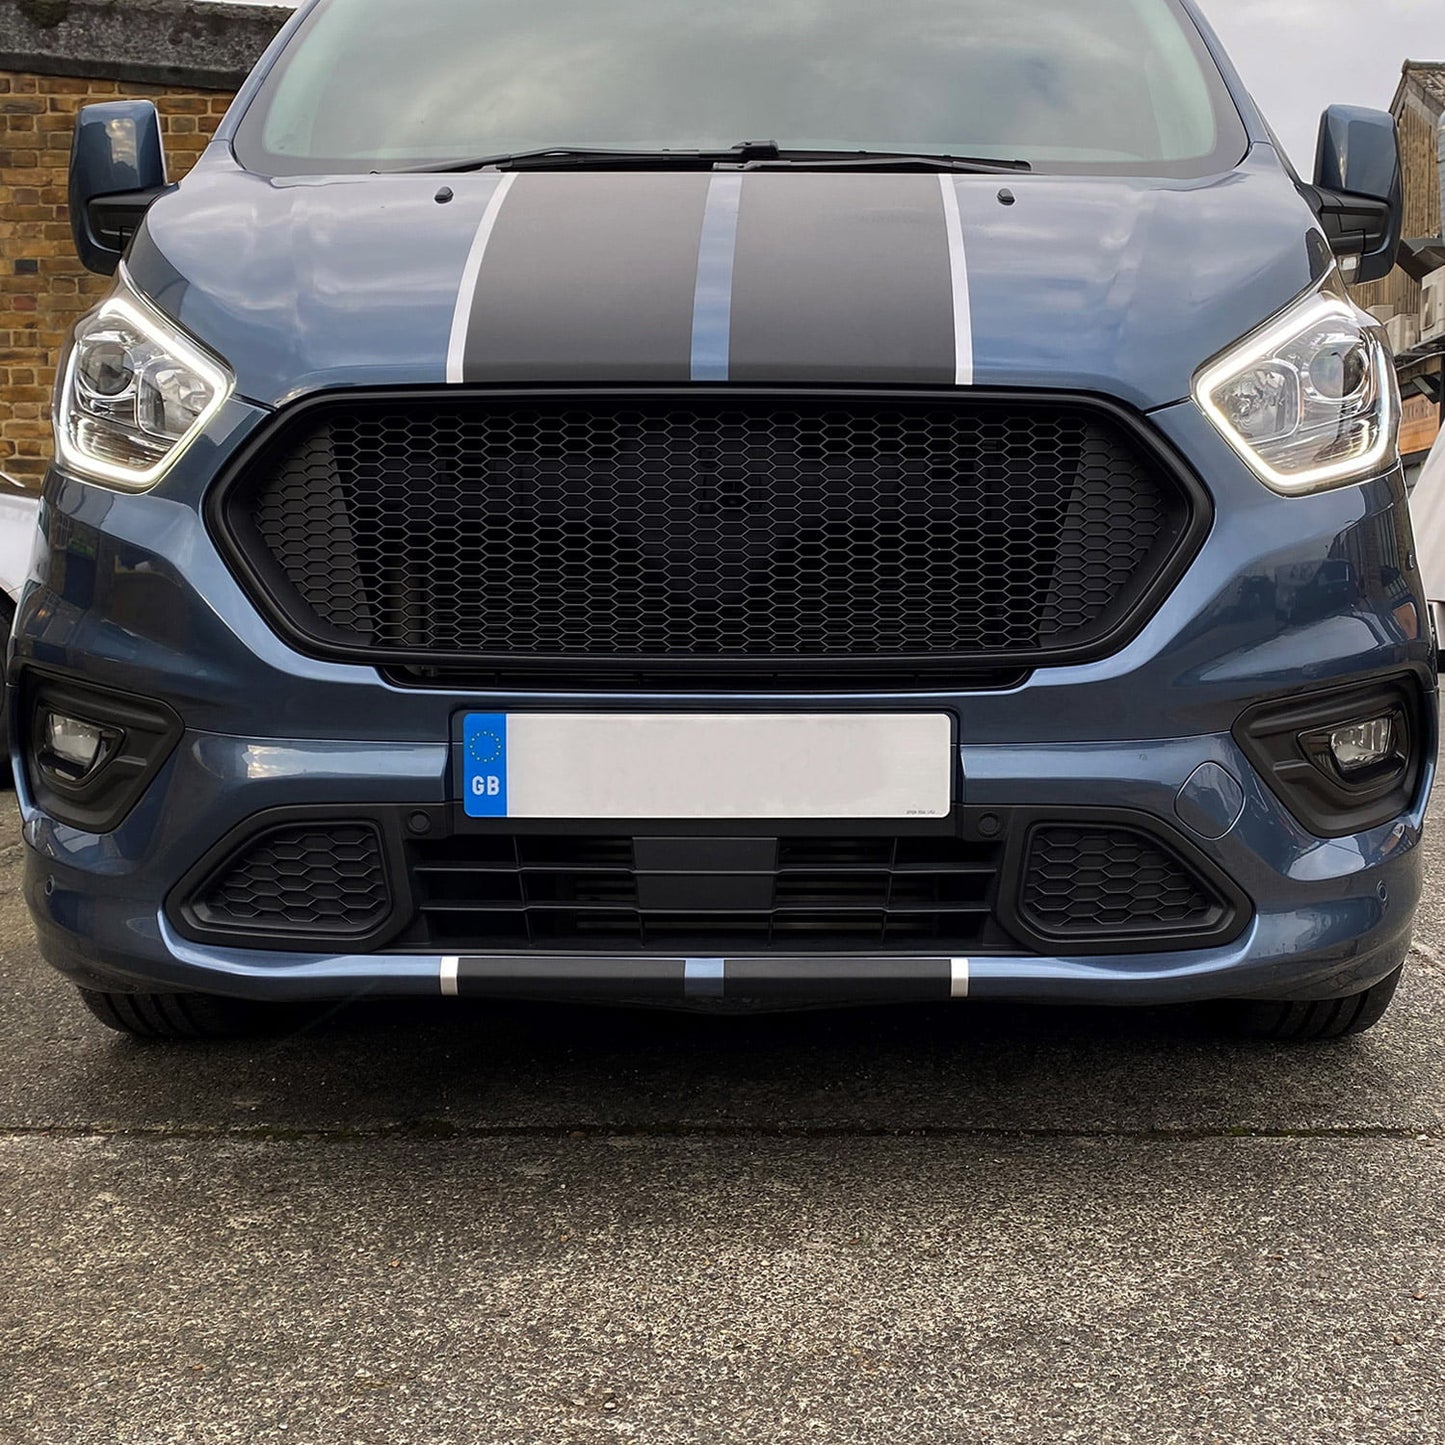 For Ford Transit Custom Front Badgeless Honeycomb Grille Only - Matte Black Painted and Ready to Fit